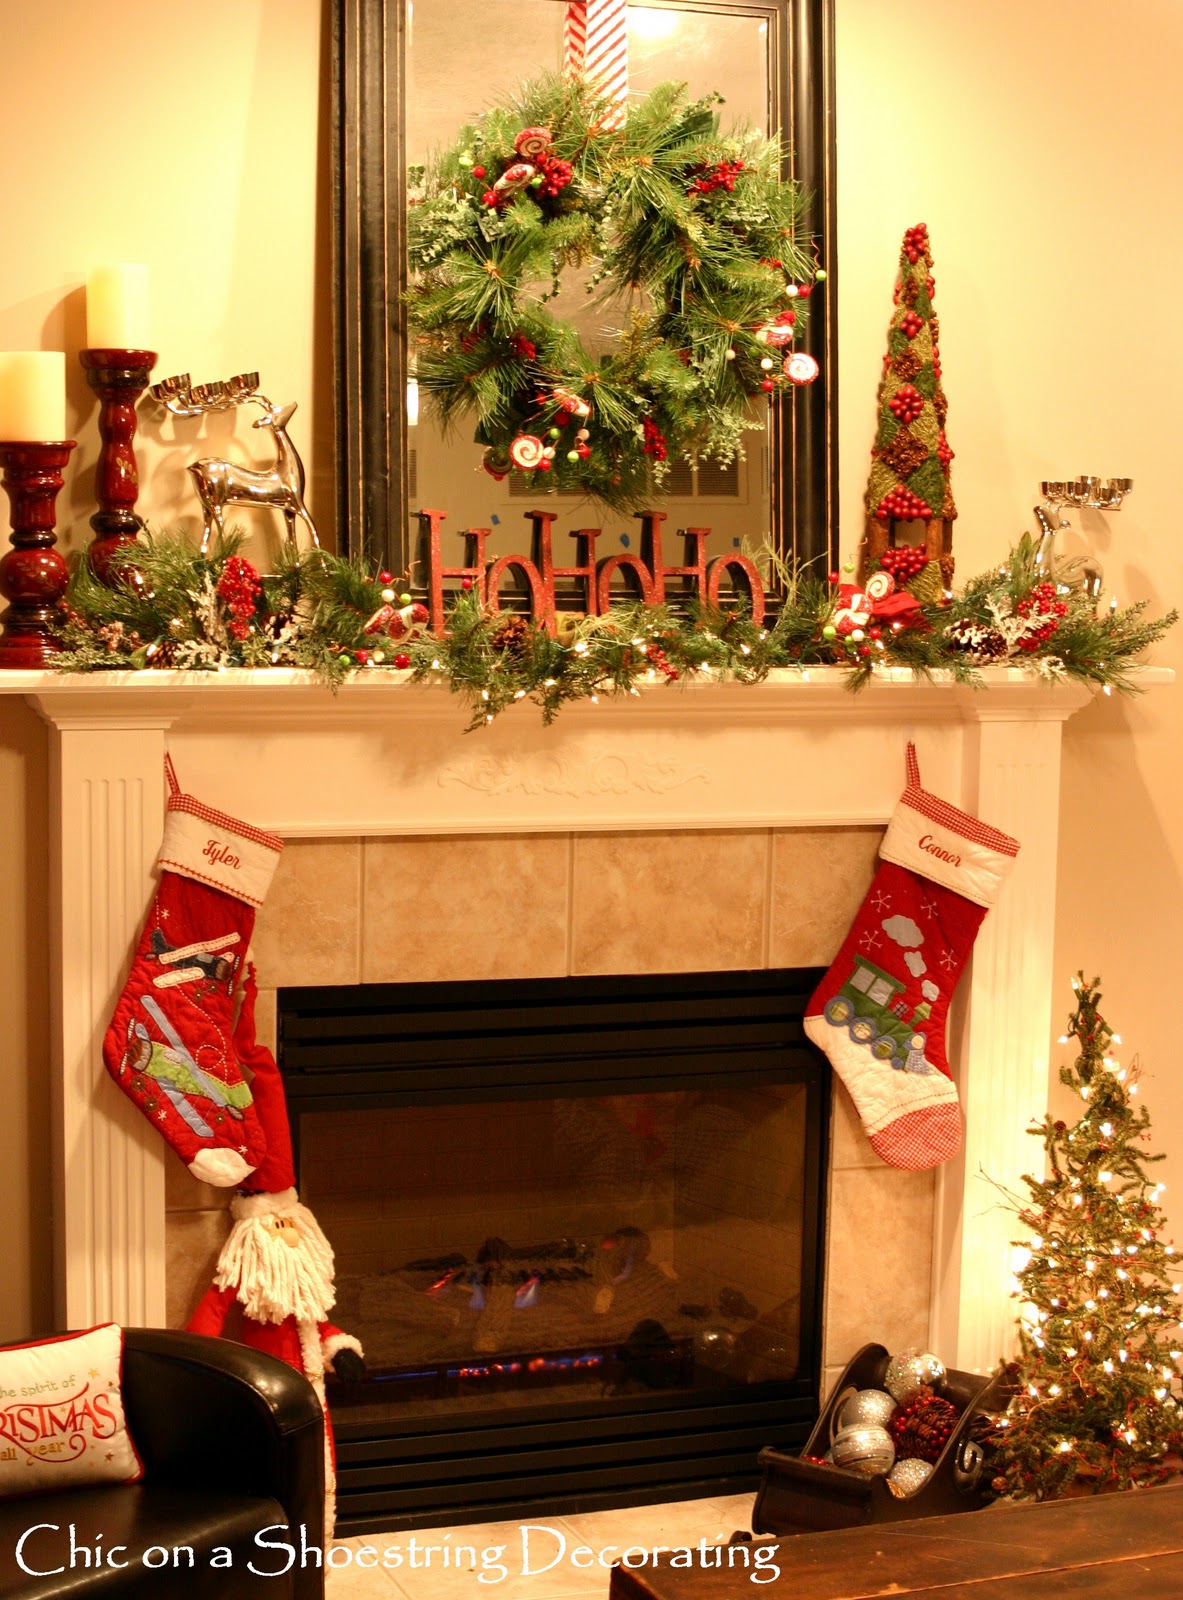 Chic on a Shoestring Decorating: My not-so-simple Christmas Decor Tour ...